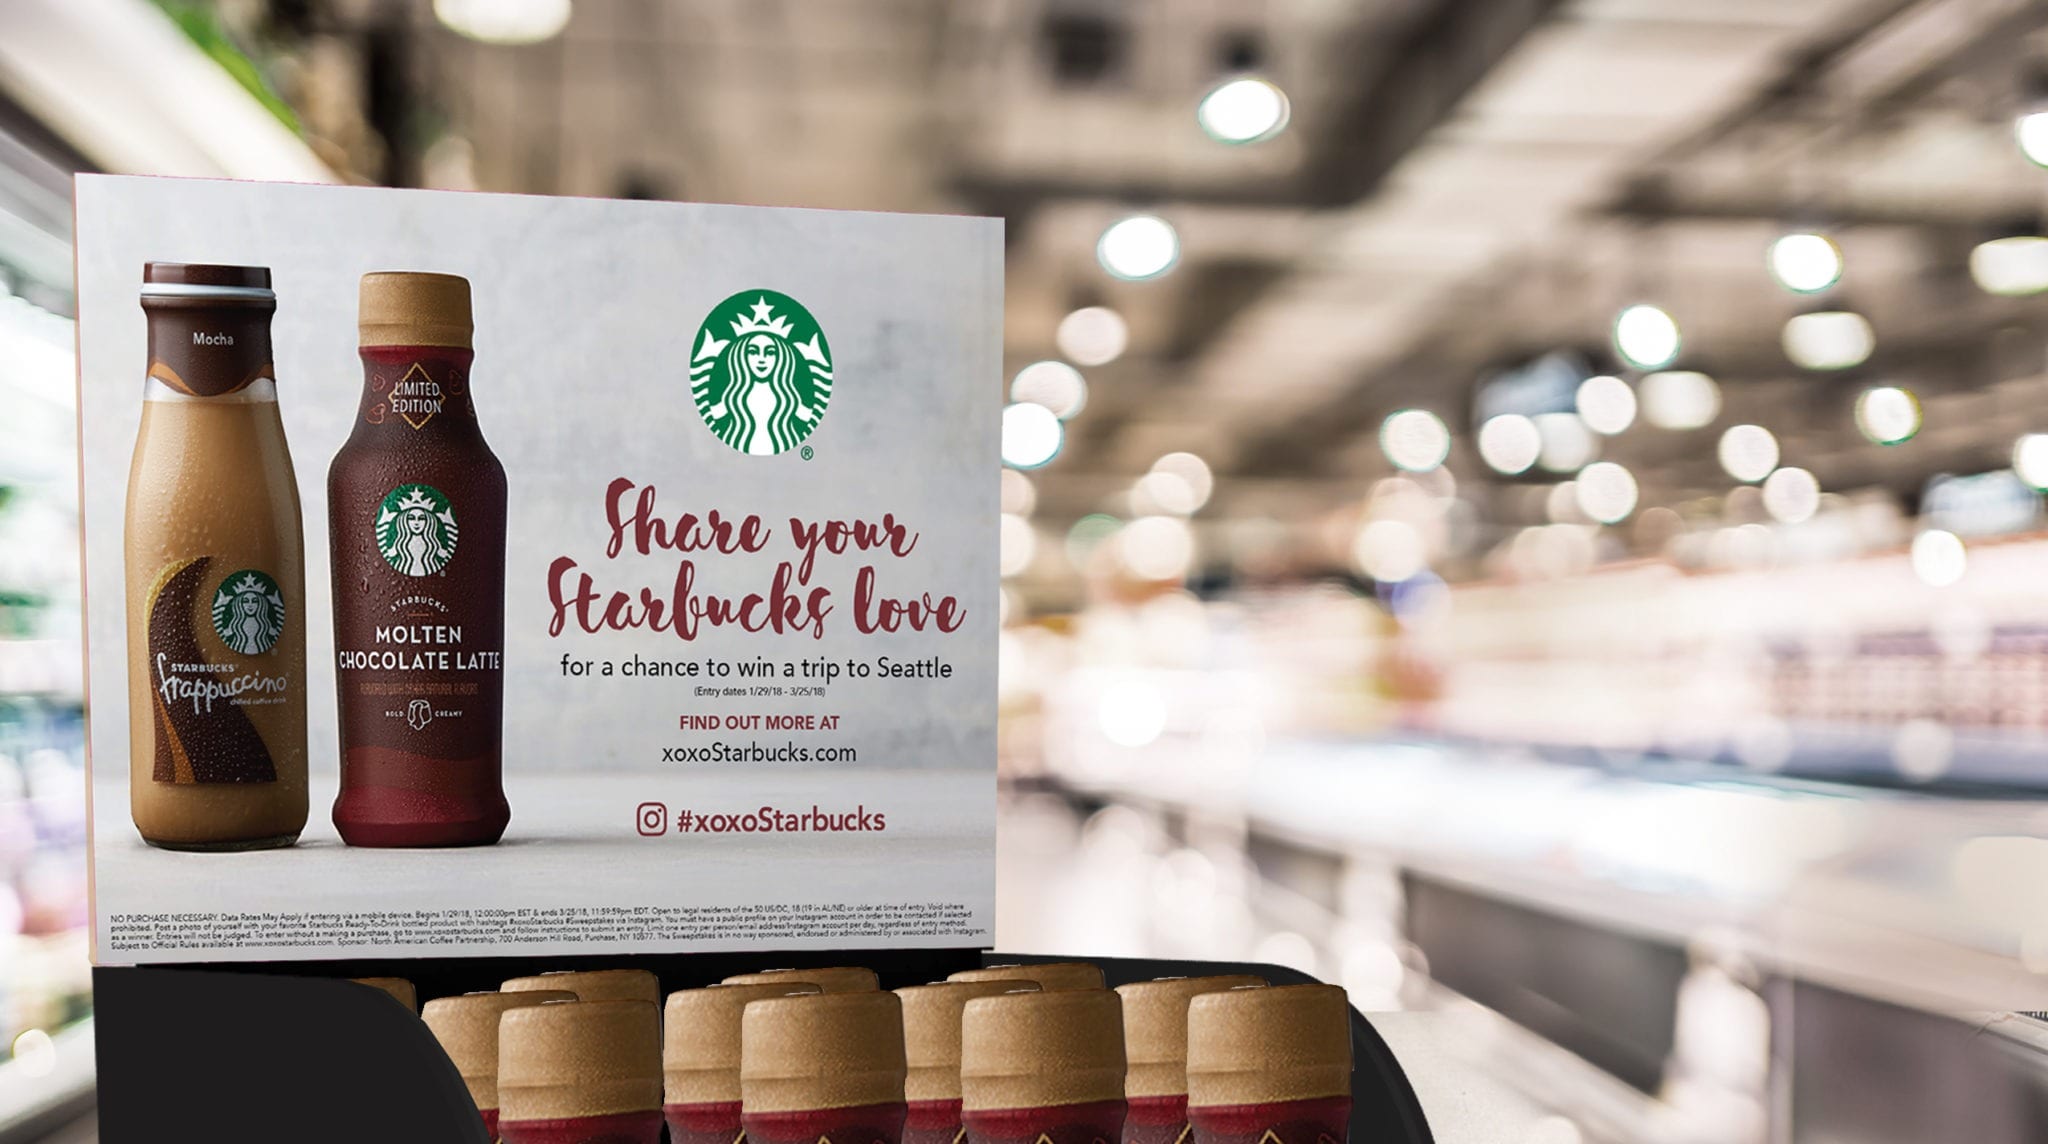 Connecting Digital to In-Store Drives Sales for Starbucks